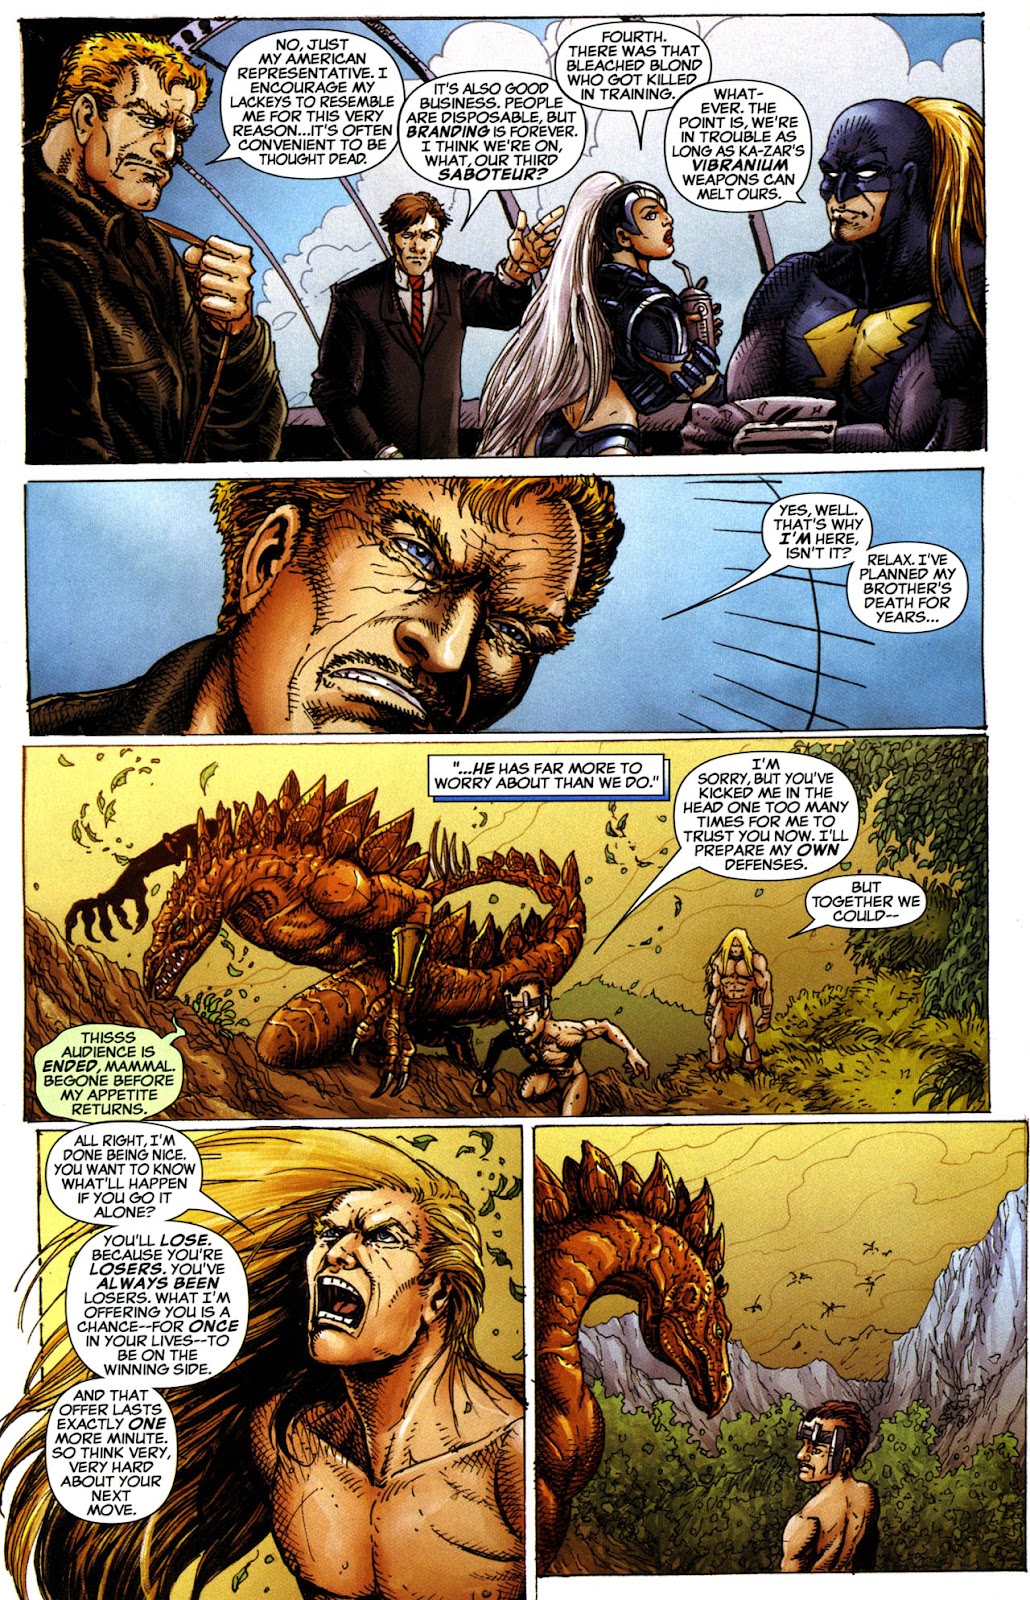 Marvel Comics Presents (2007) issue 6 - Page 12